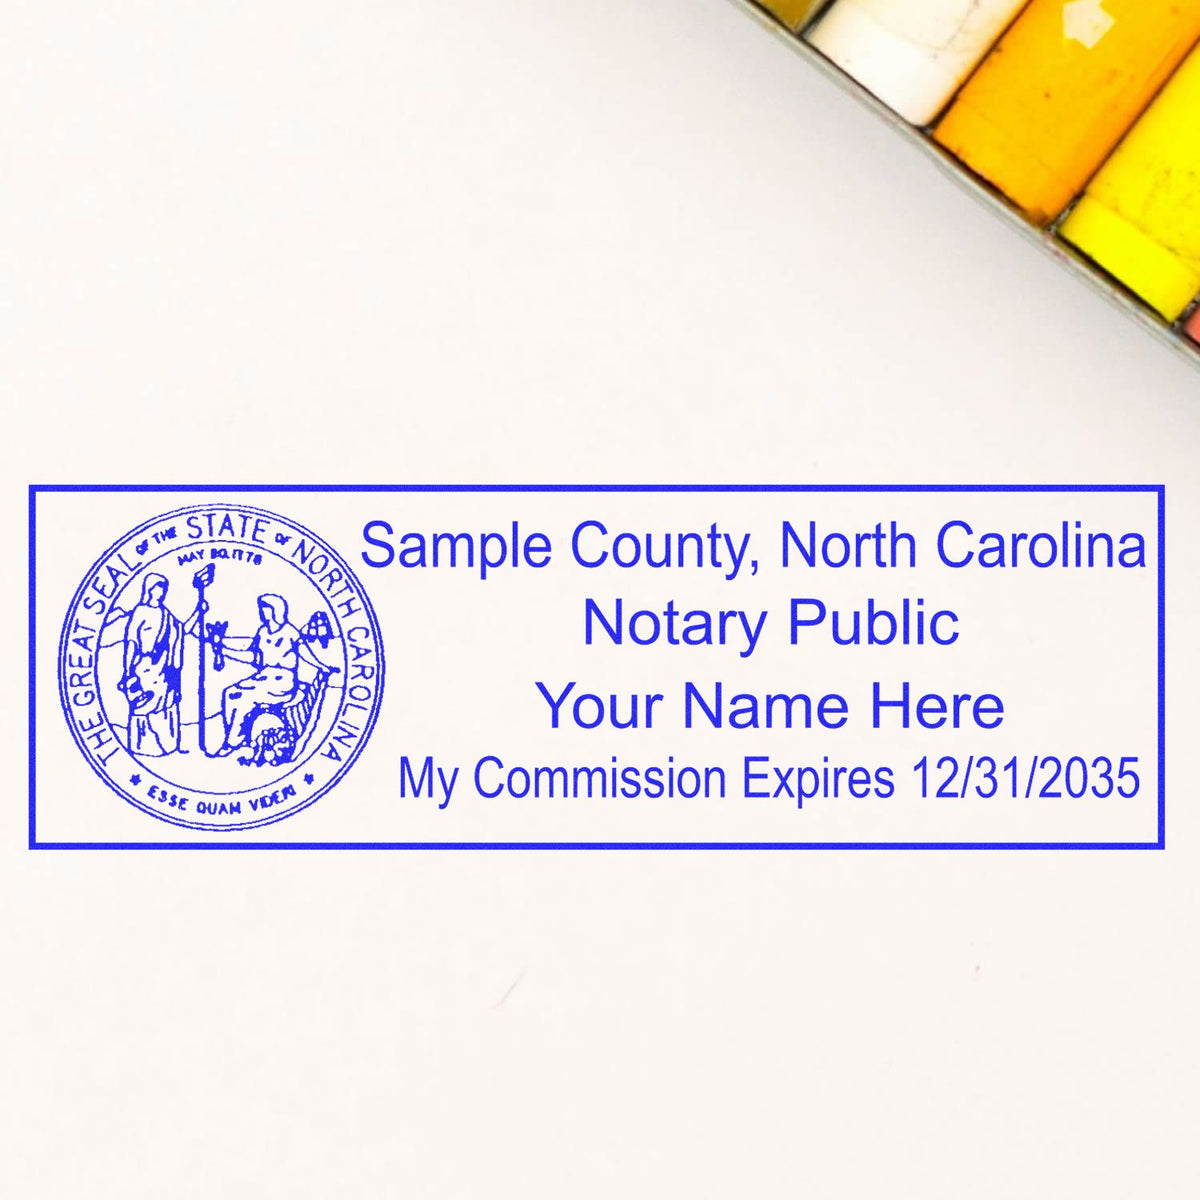 This paper is stamped with a sample imprint of the Slim Pre-Inked State Seal Notary Stamp for North Carolina, signifying its quality and reliability.